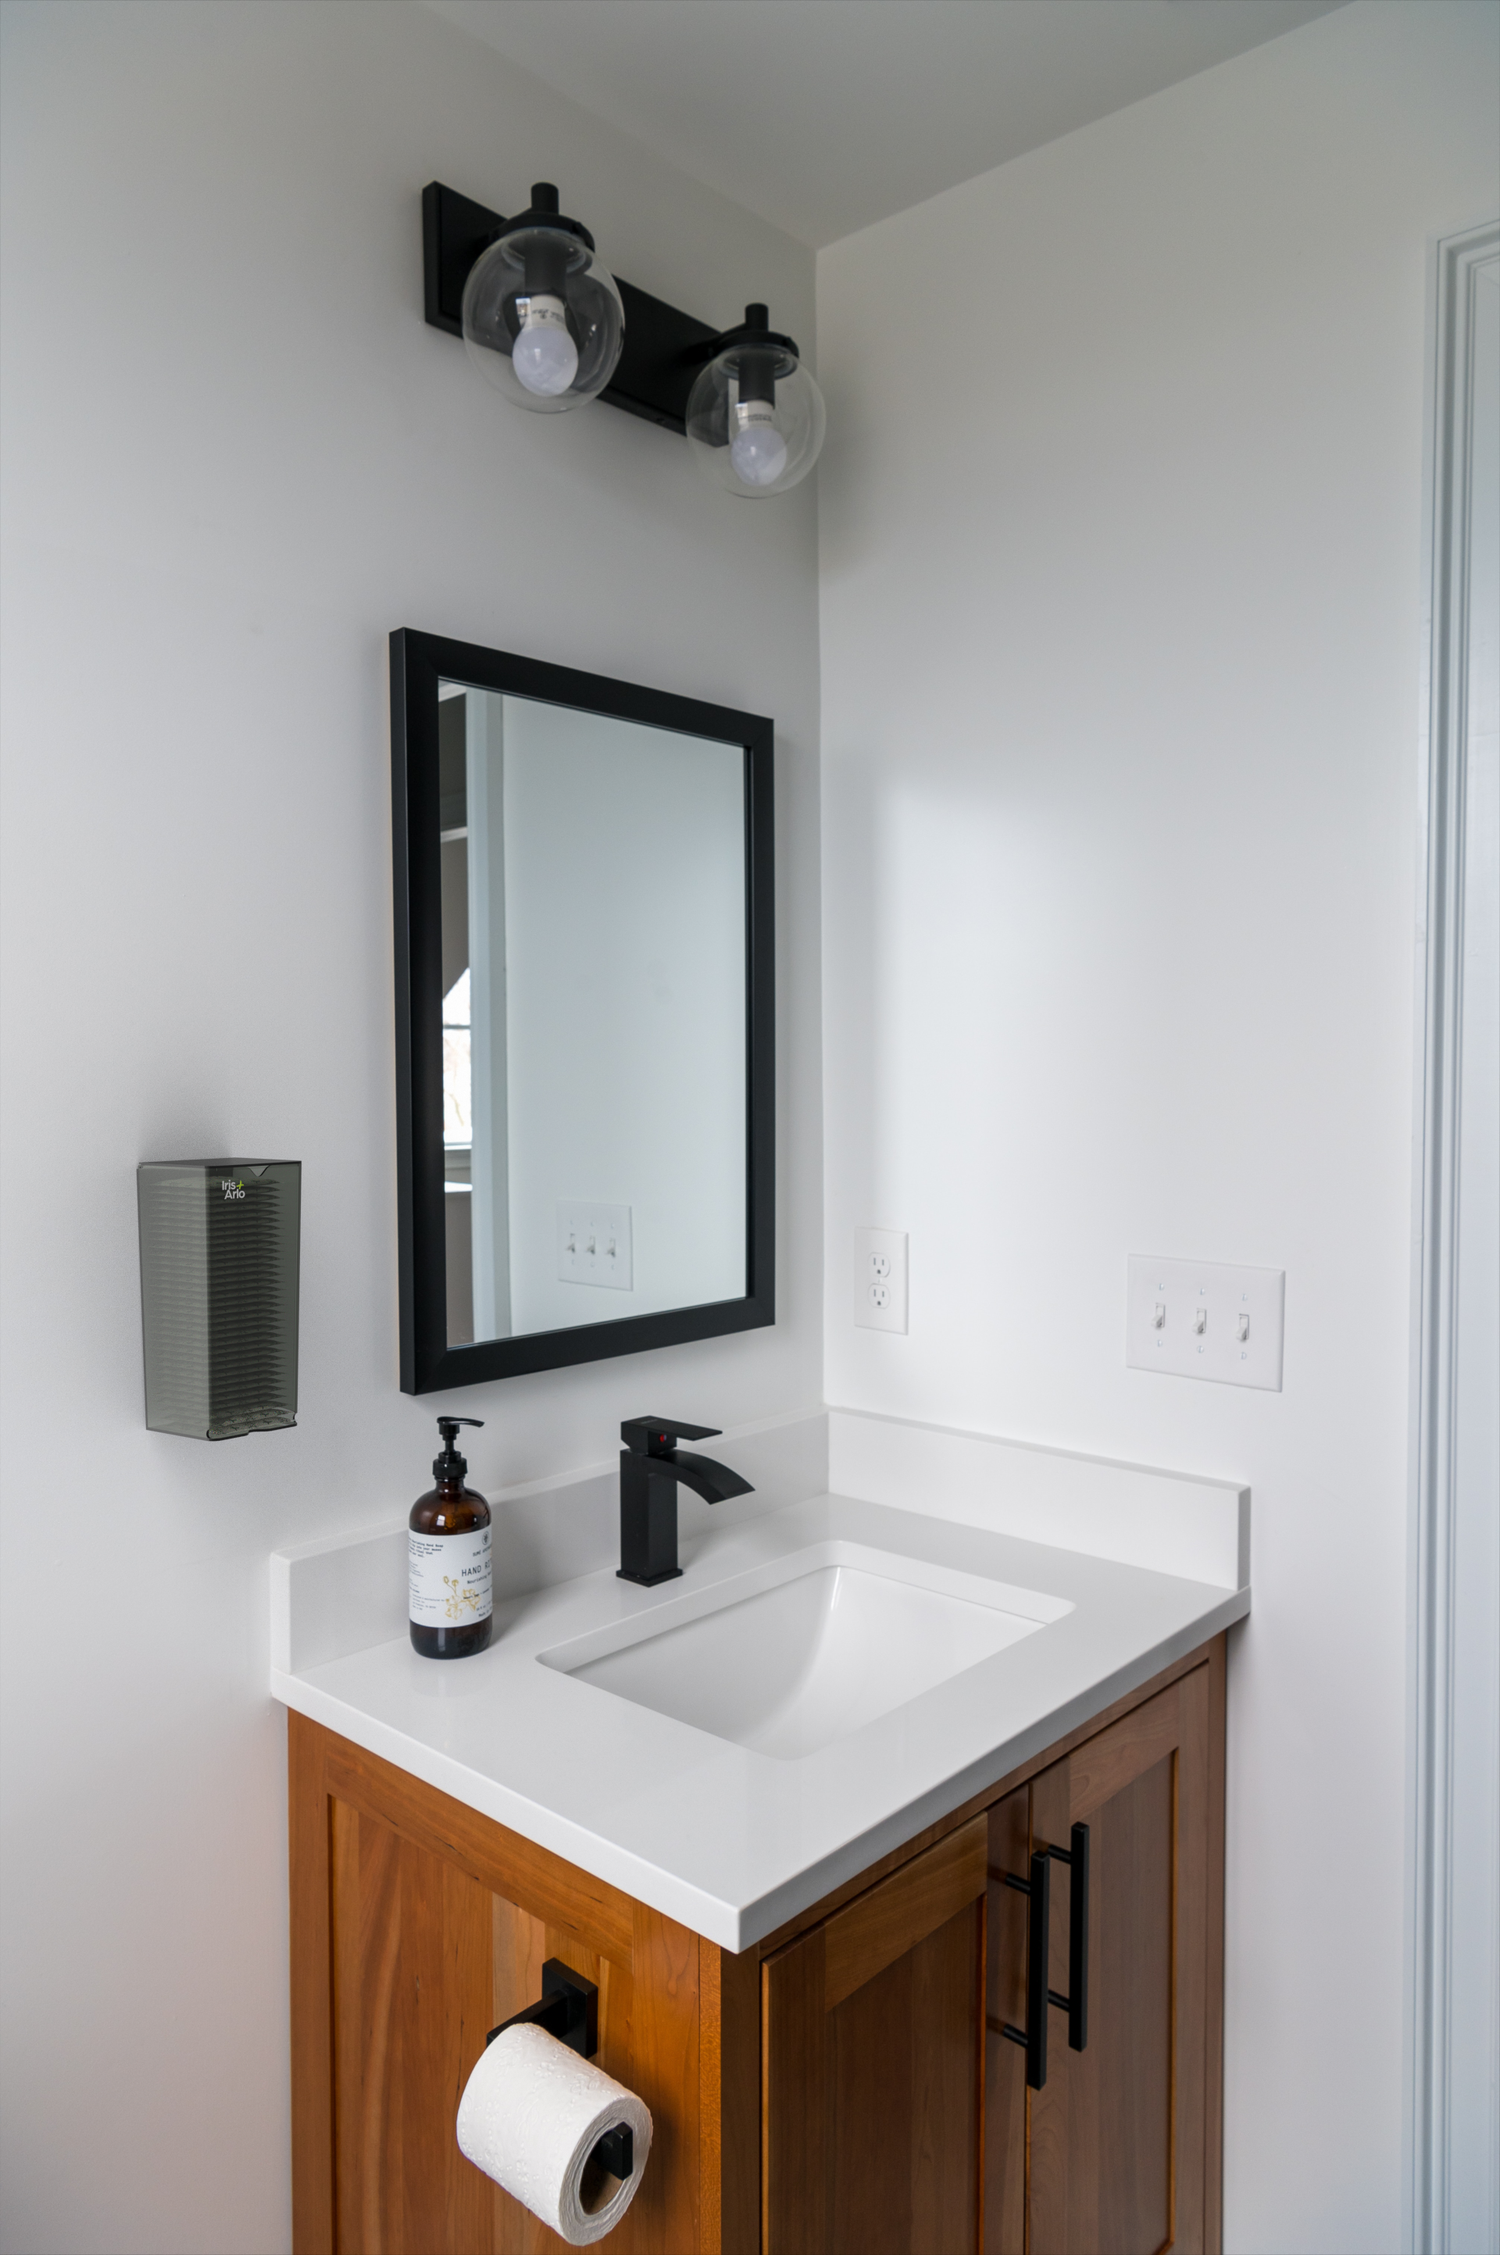 Iris + Arlo Recycled Wall-mounted Plexiglass Mural Dispenser - Daily Pads in a corporate bathroom